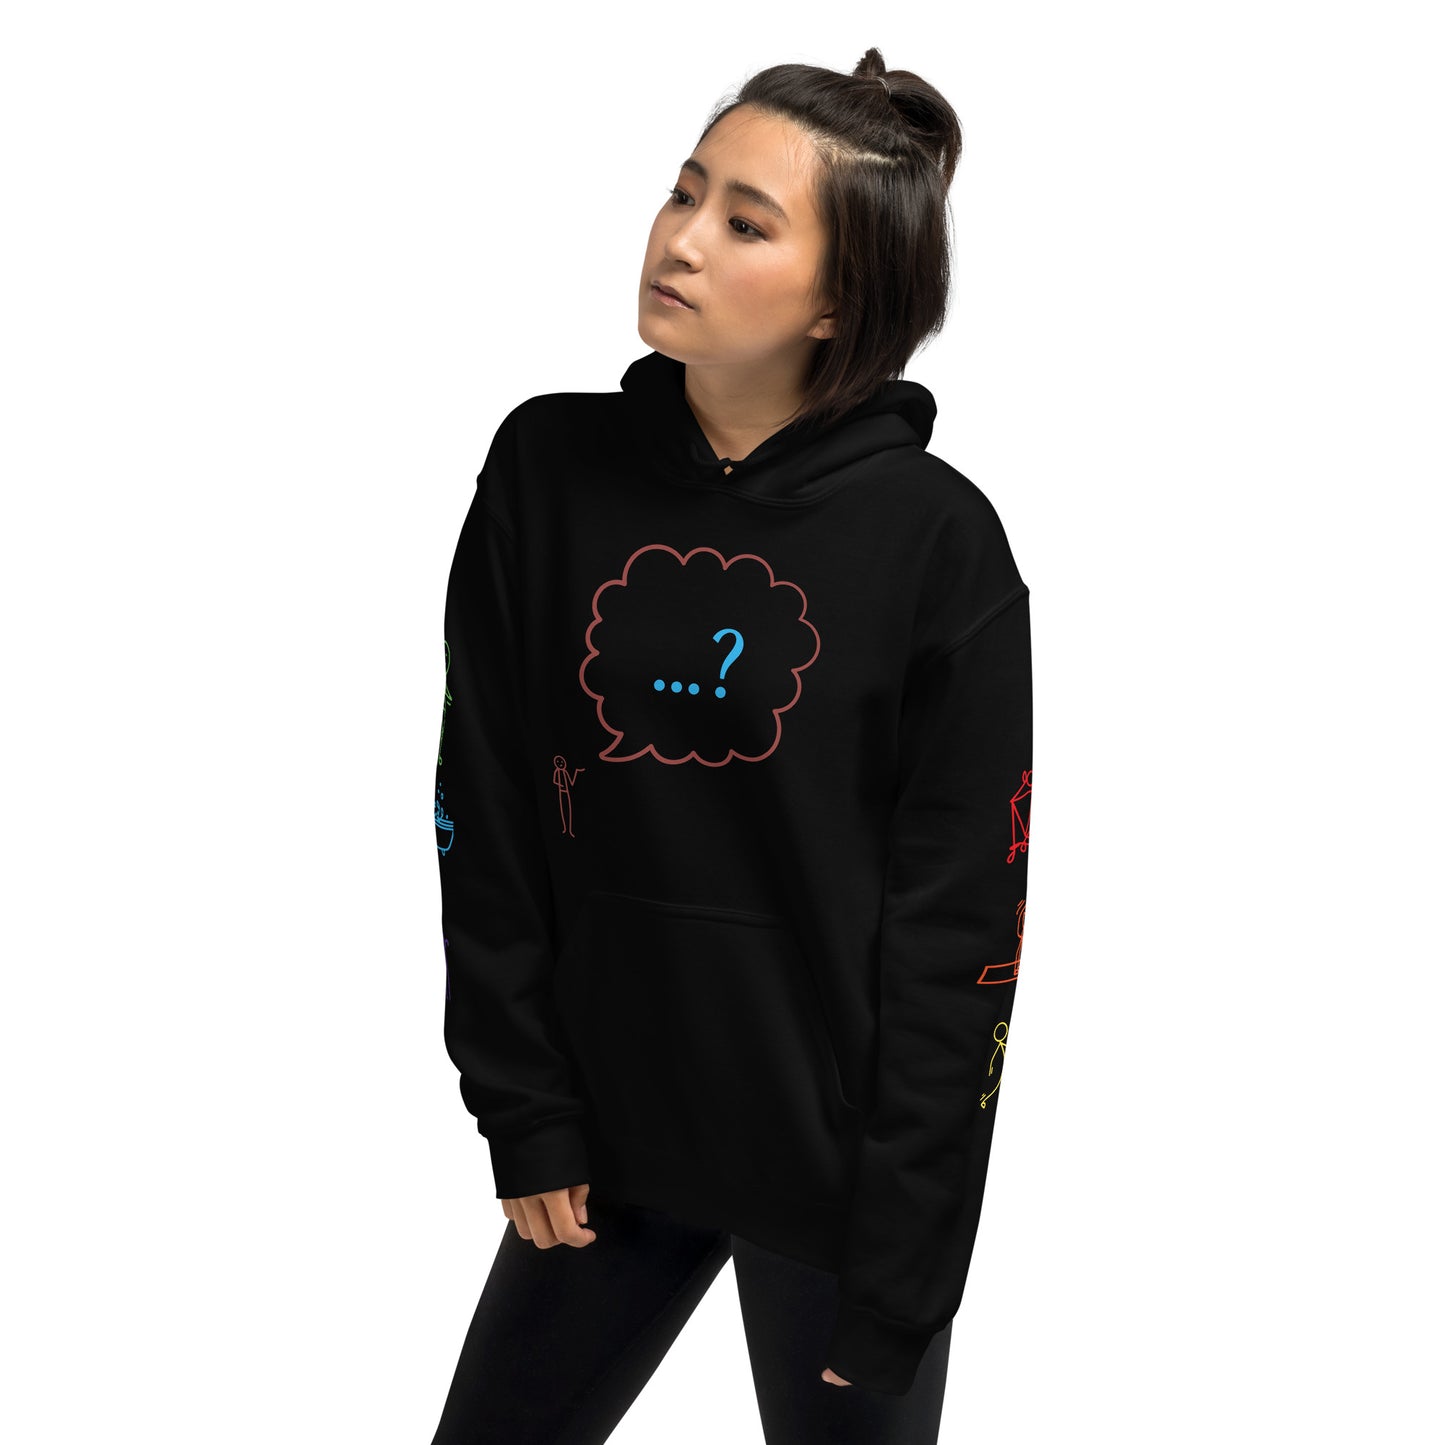 Free Us All Rest as Protest Unisex Hoodie